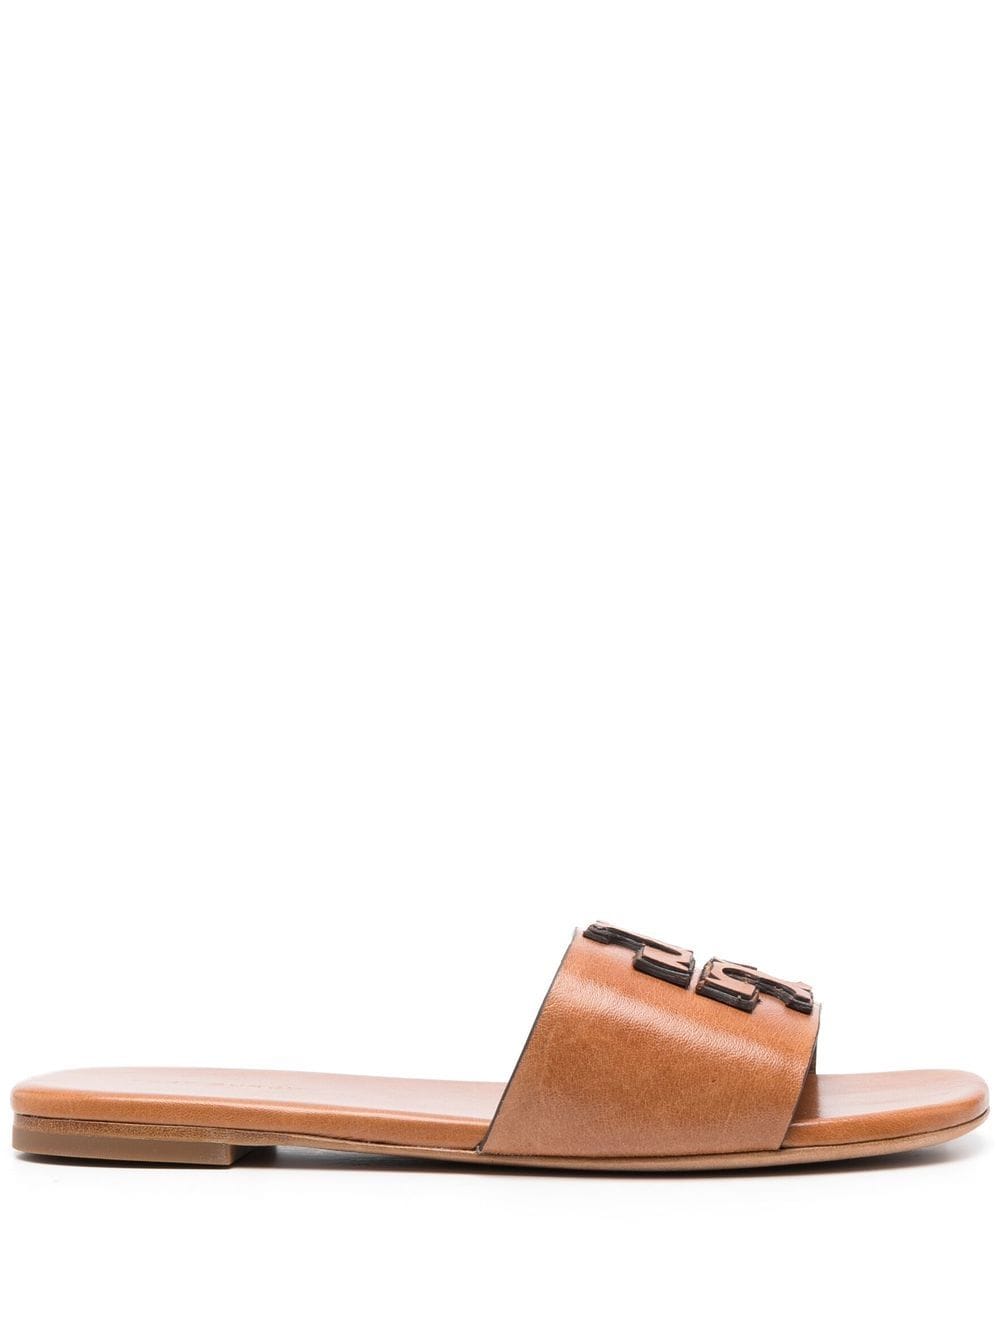 Tory Burch embossed-logo leather slides - Brown von Tory Burch